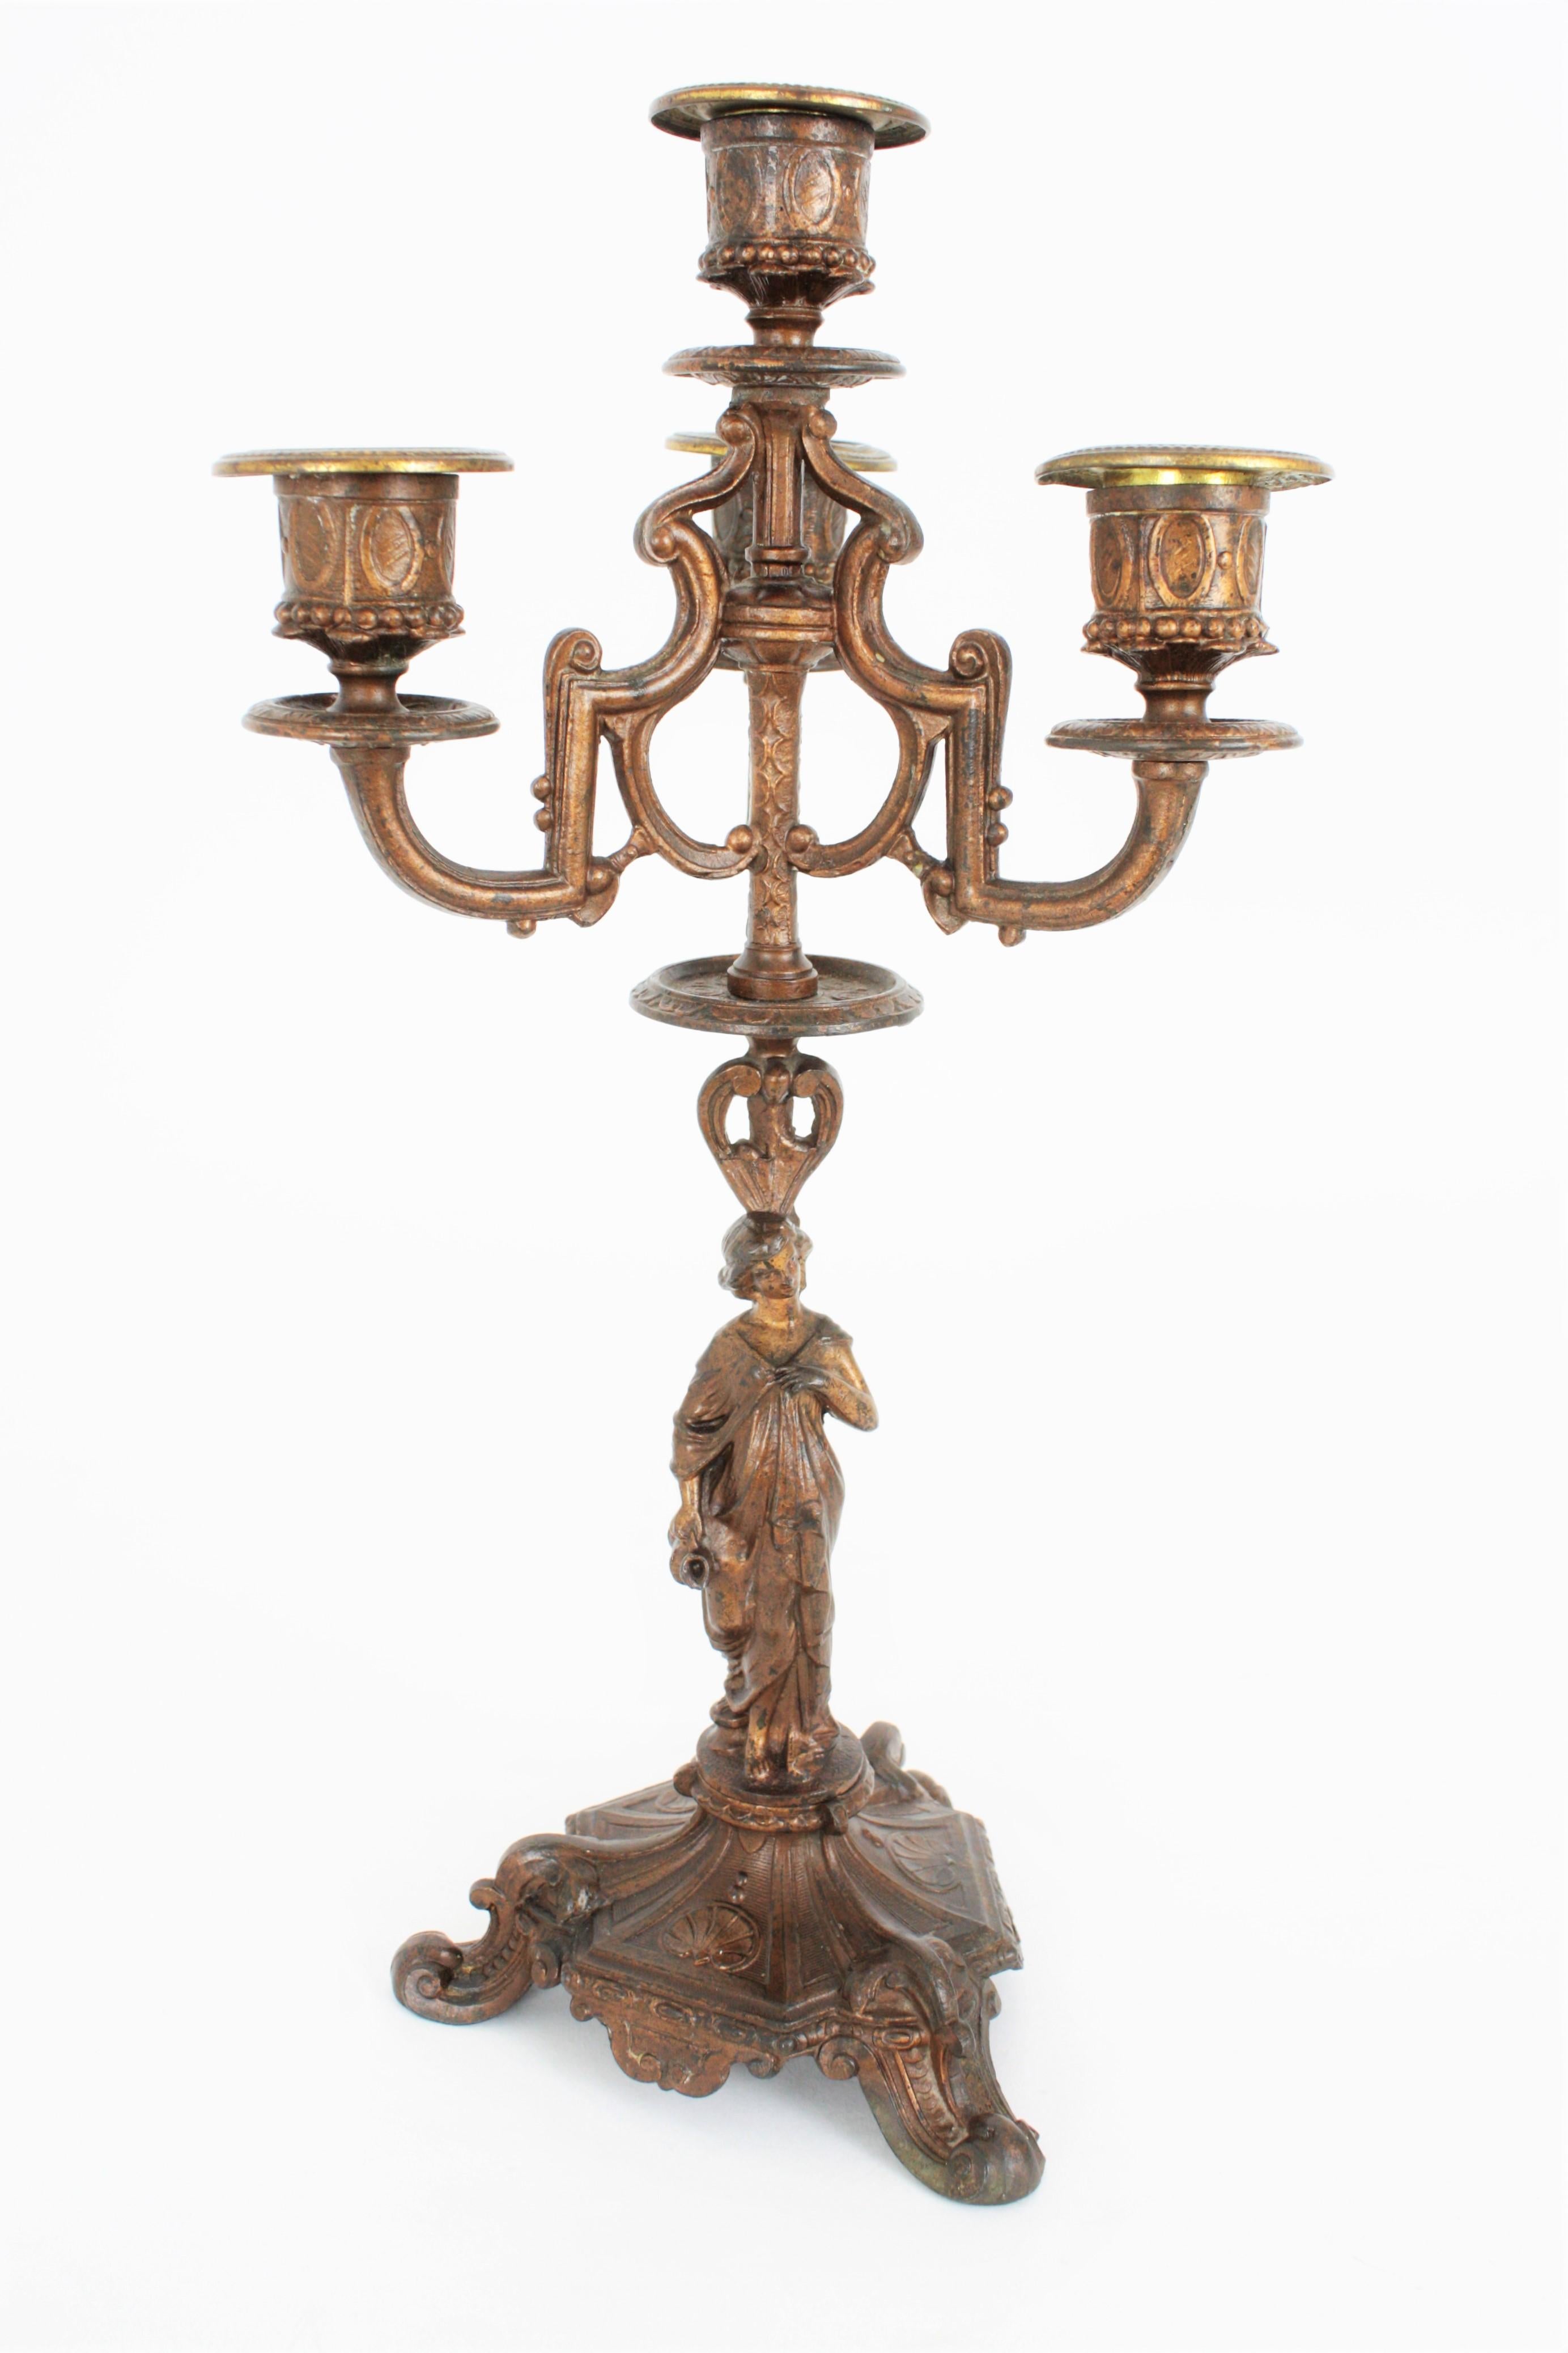 Pair of 19th century French Empire patinated bronze figural four-light candelabra, France, circa 1880.
Marked on the base: 446 LSF.
Priced and on sale individually.